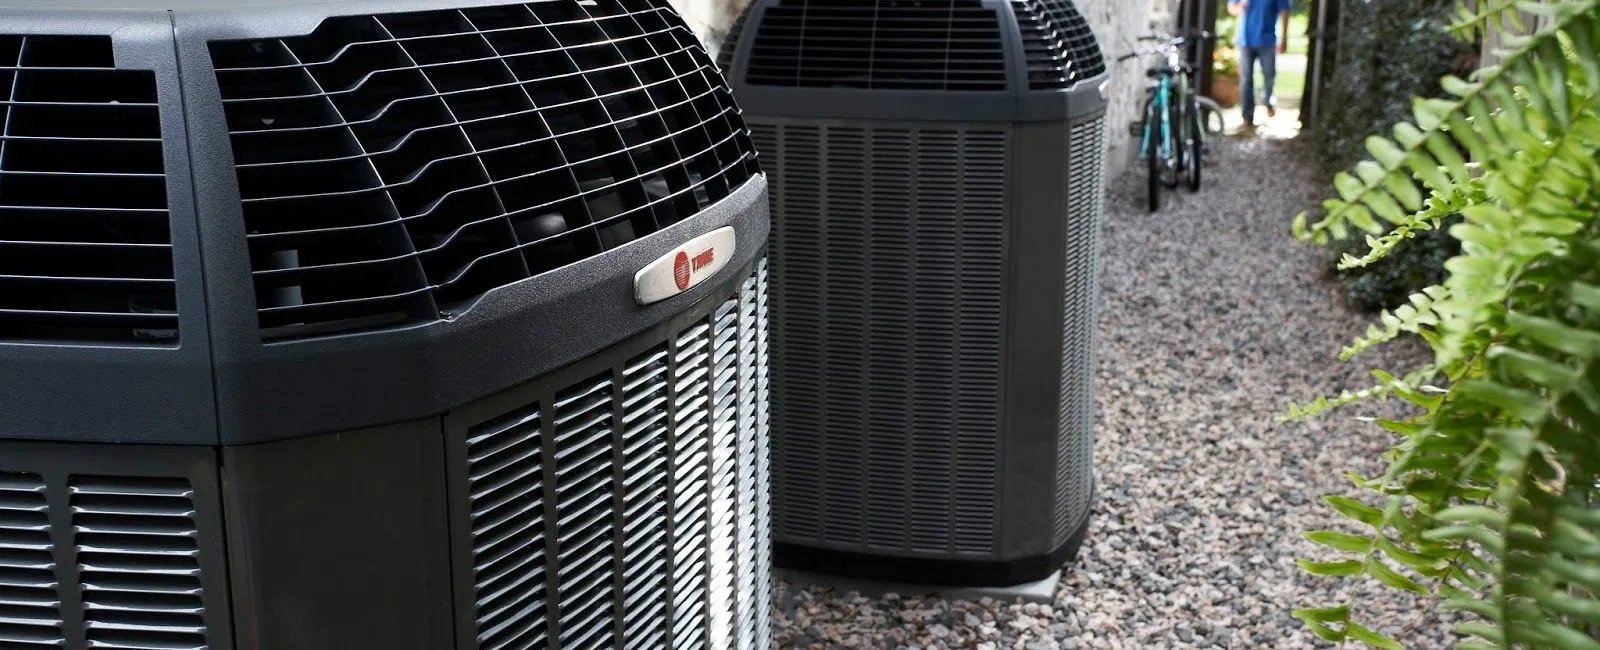 air condition units outside of a home